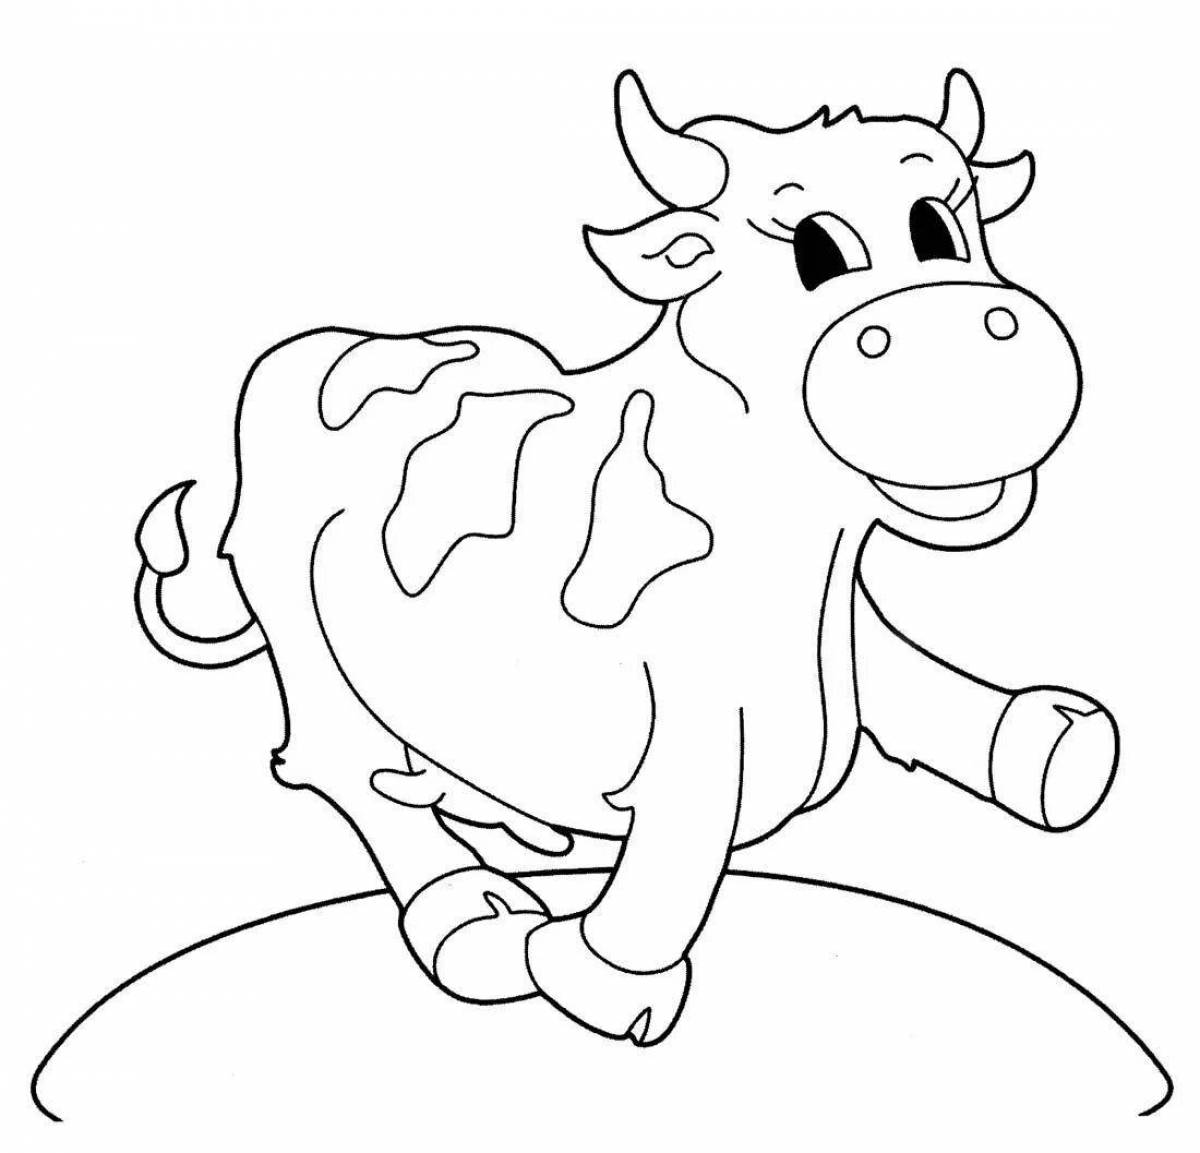 Colourful coloring bull for children